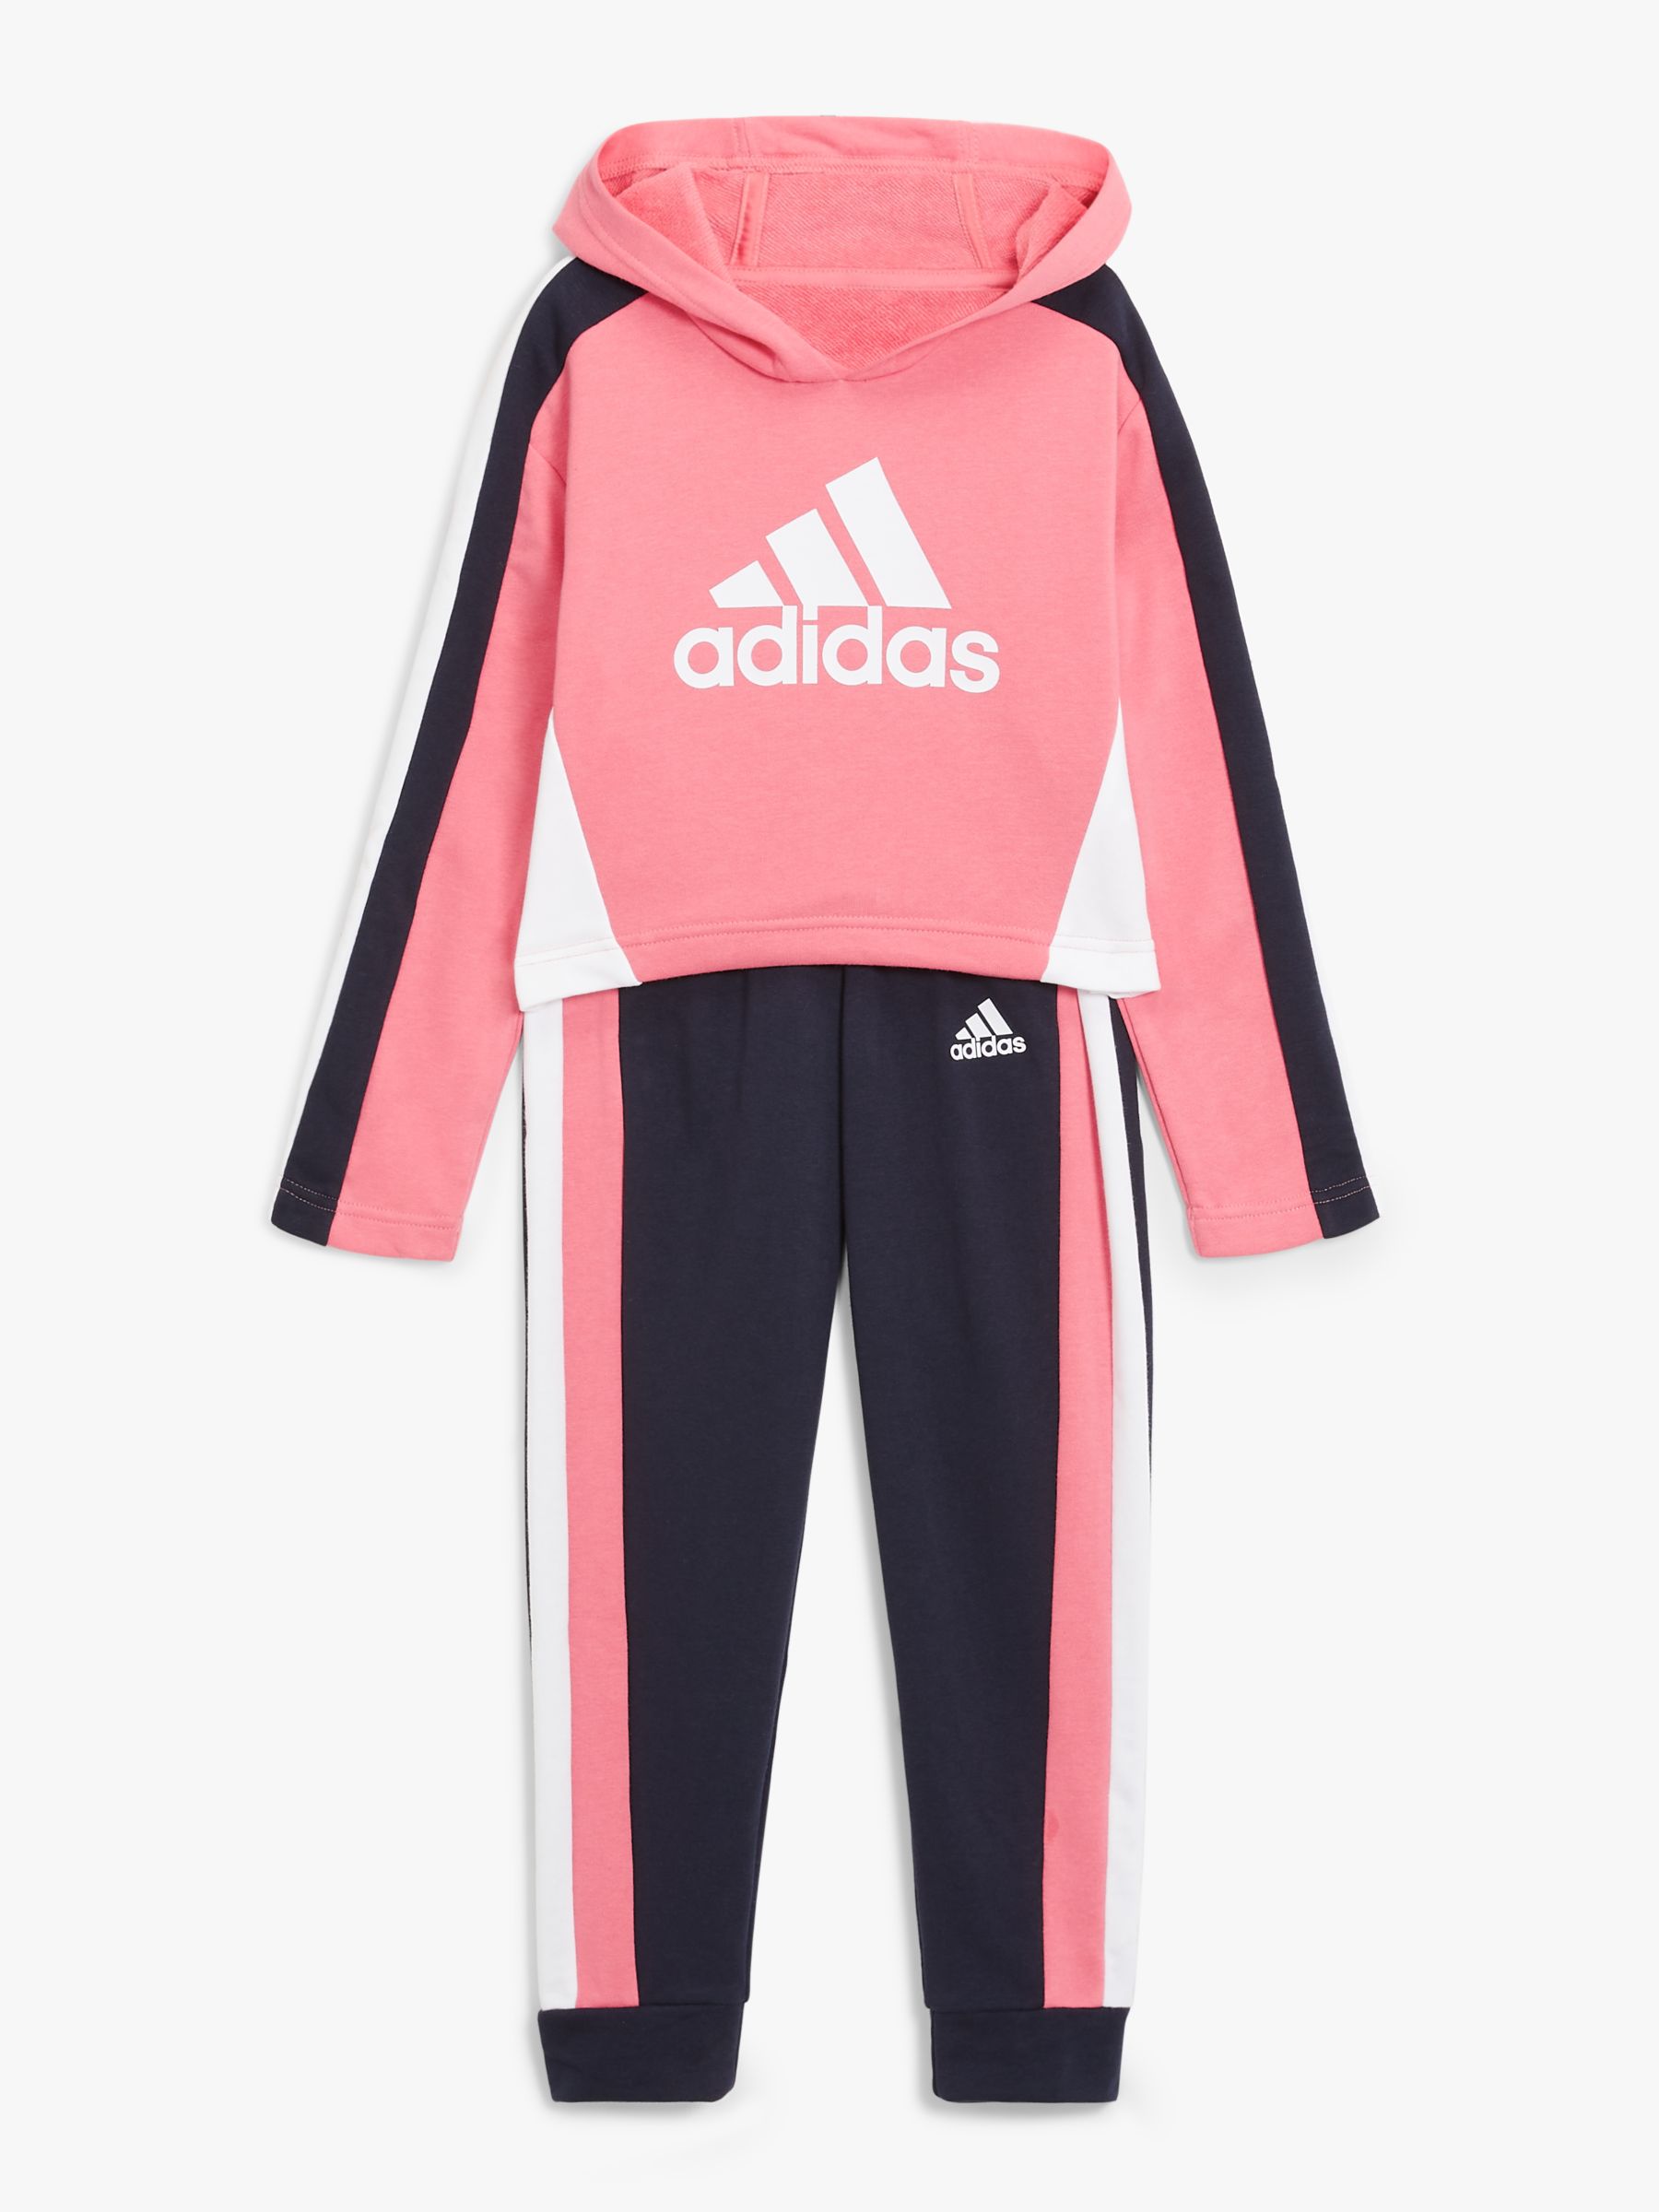 adidas Children's Hooded Cropped Tracksuit, Pink at John Lewis & Partners